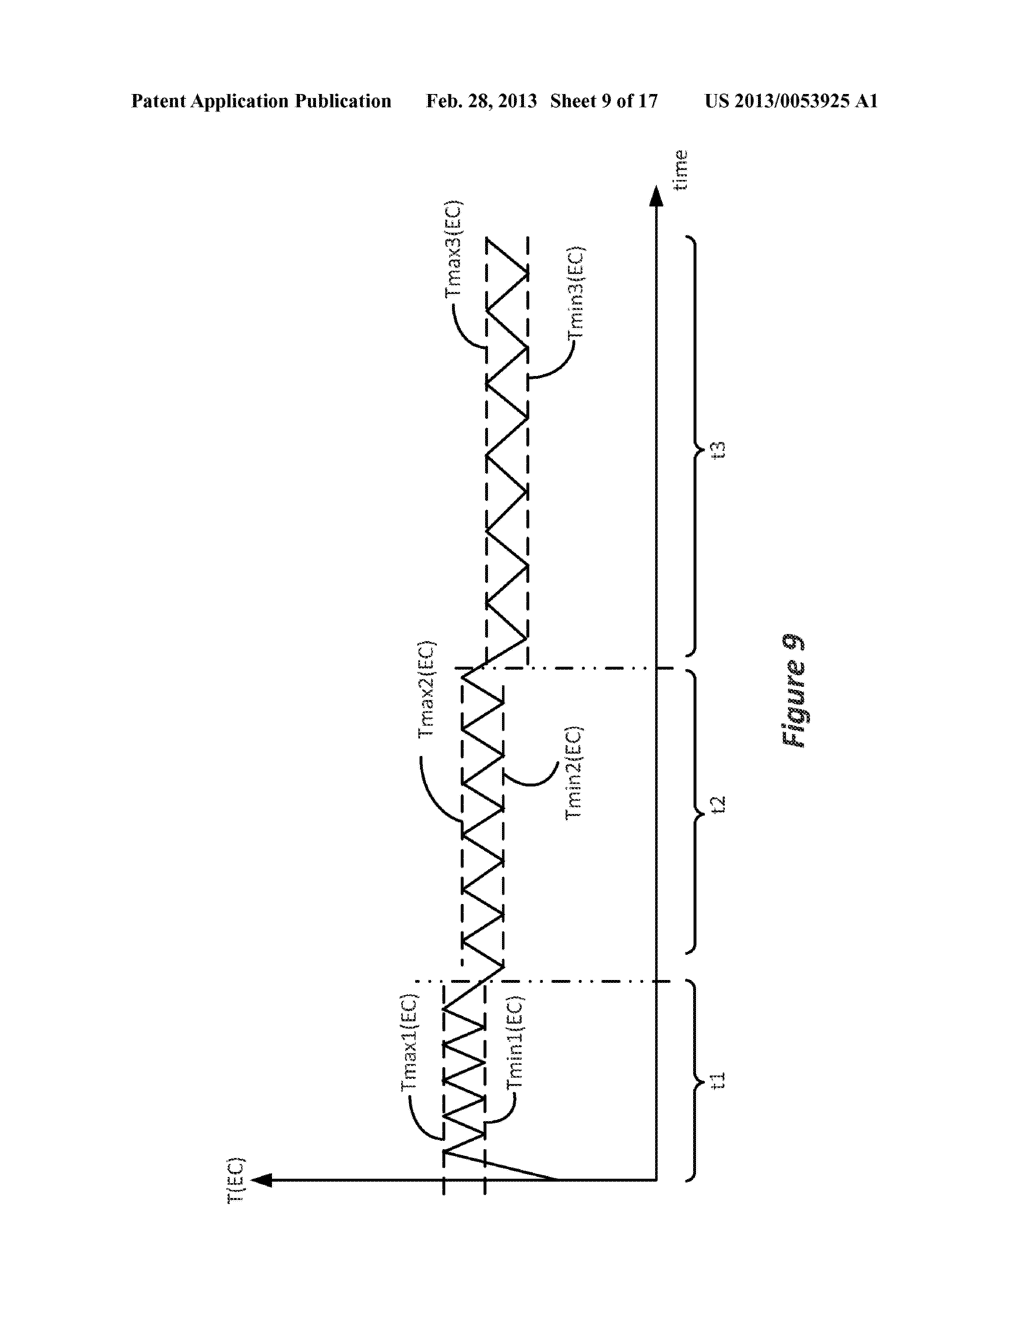 External Charger Usable with an Implantable Medical Device Having a     Programmable or Time-Varying Temperature Set Point - diagram, schematic, and image 10